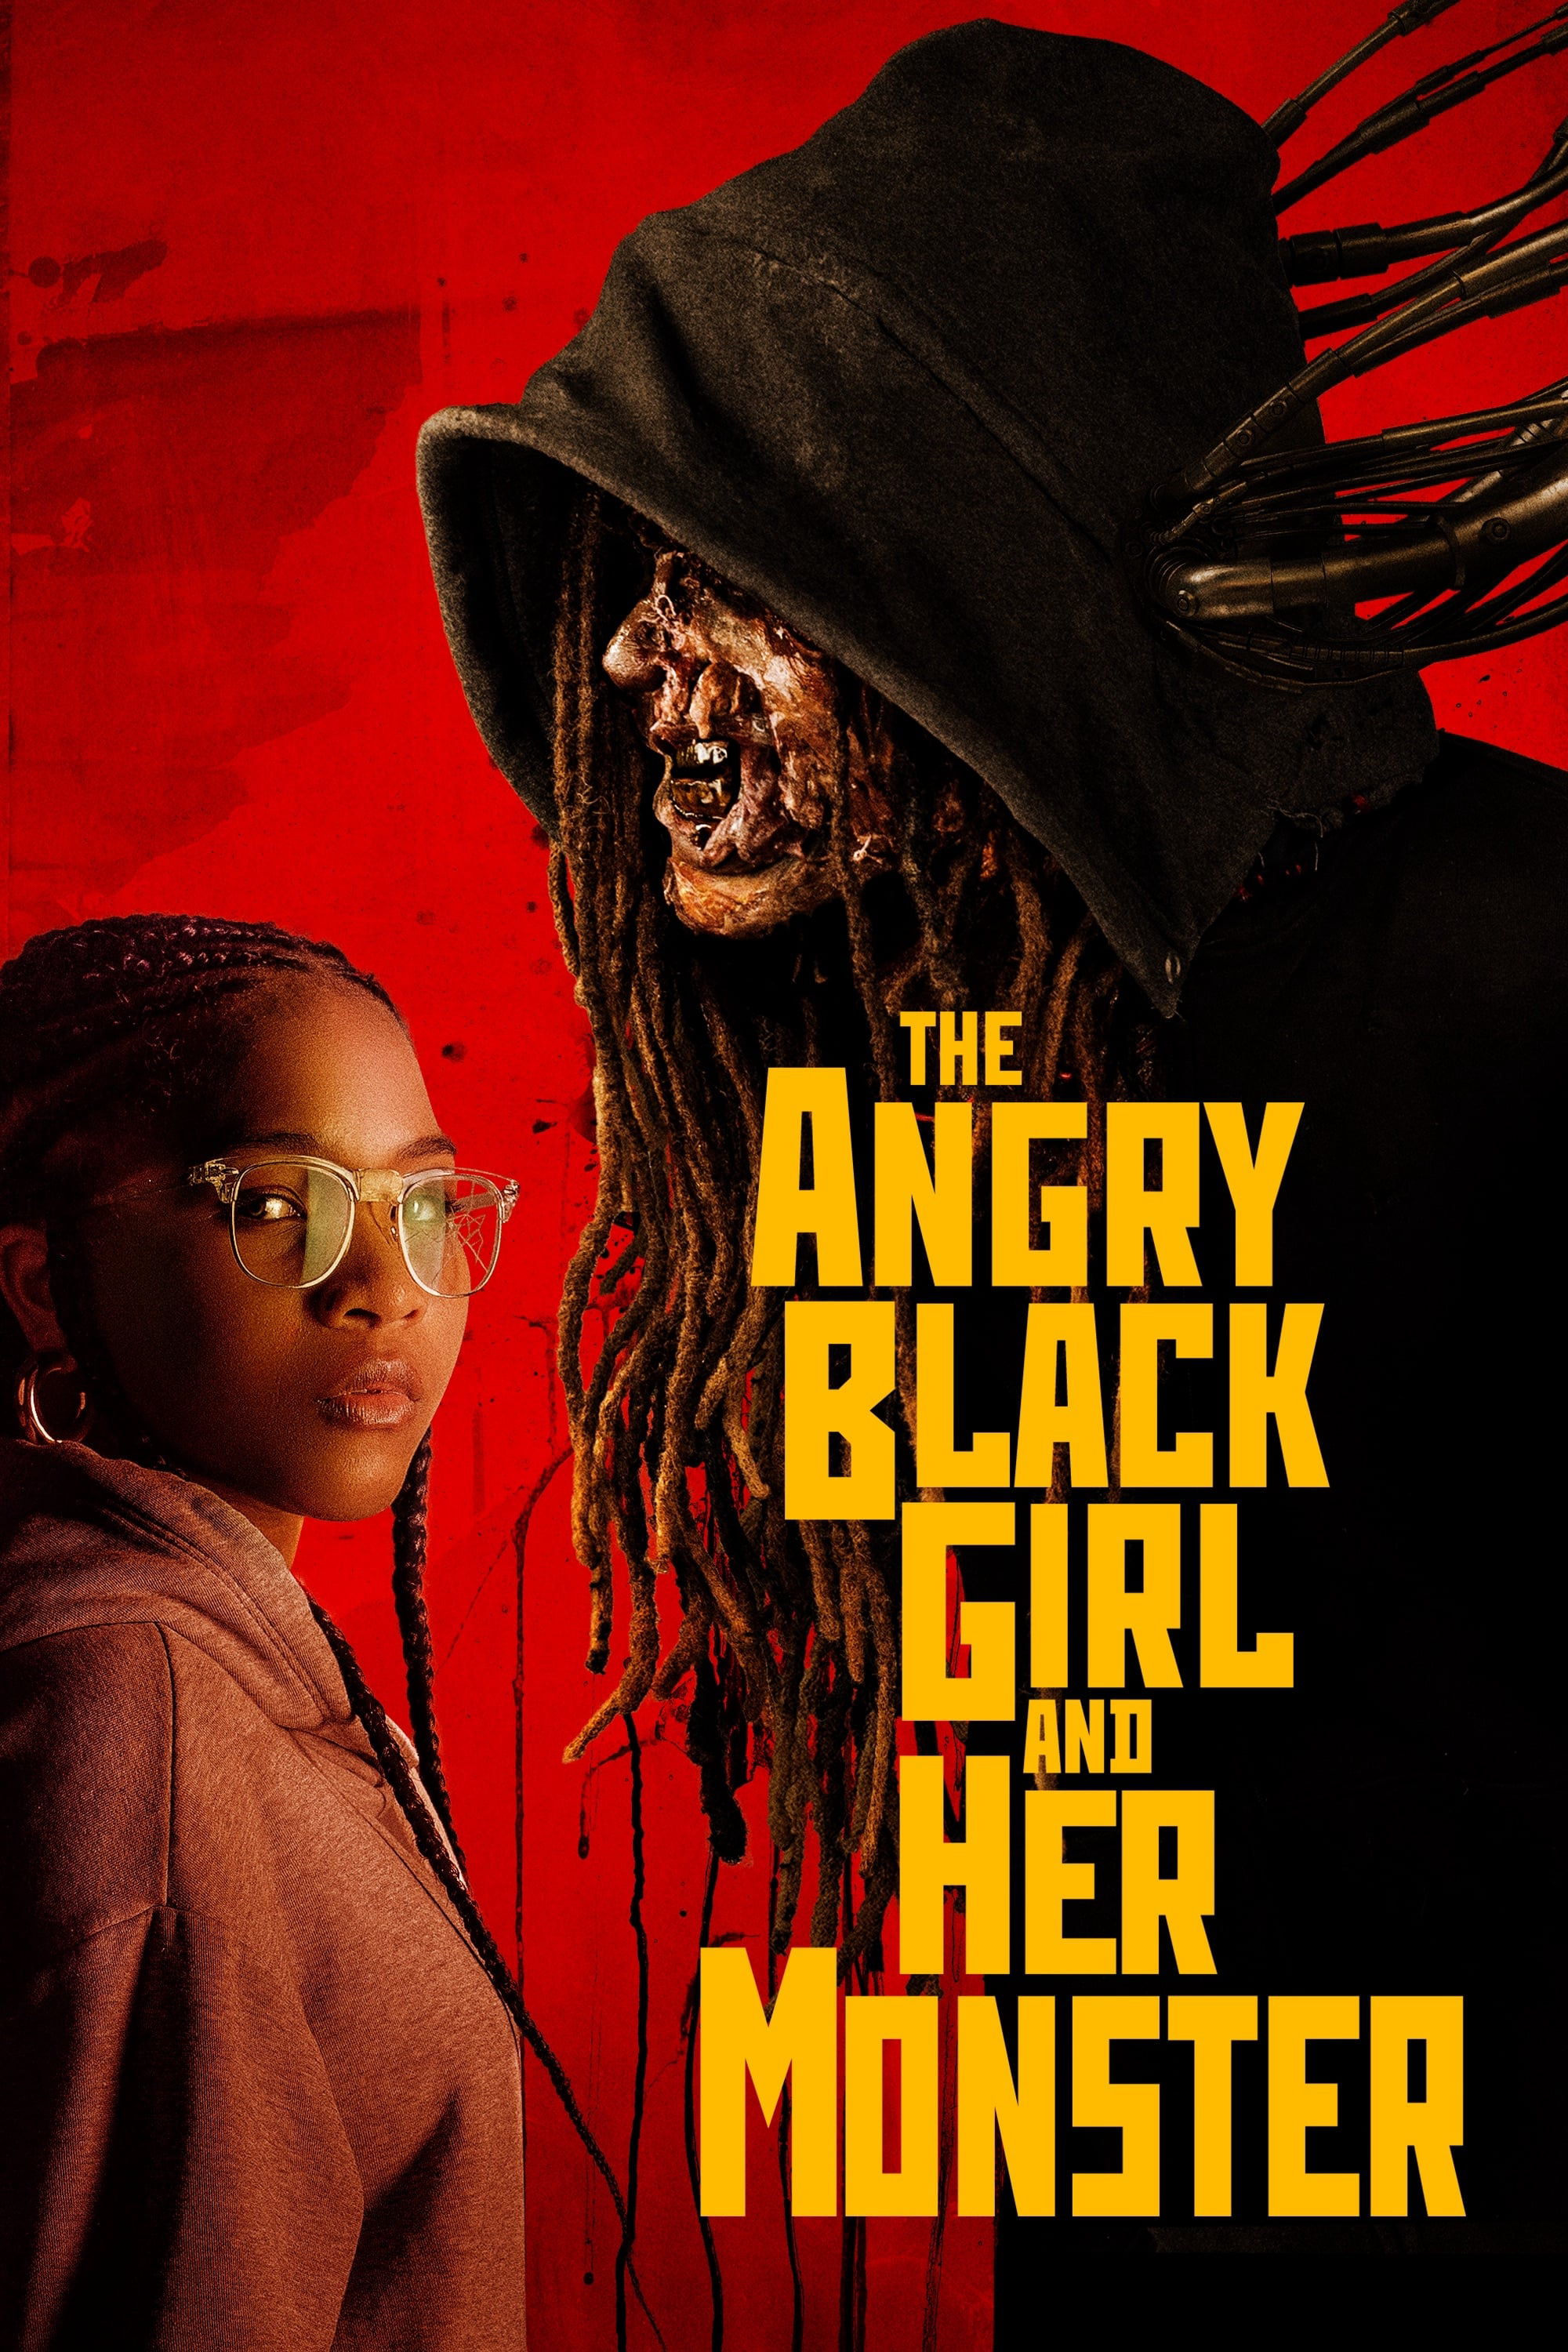 Poster Phim The Angry Black Girl and Her Monster (The Angry Black Girl and Her Monster)